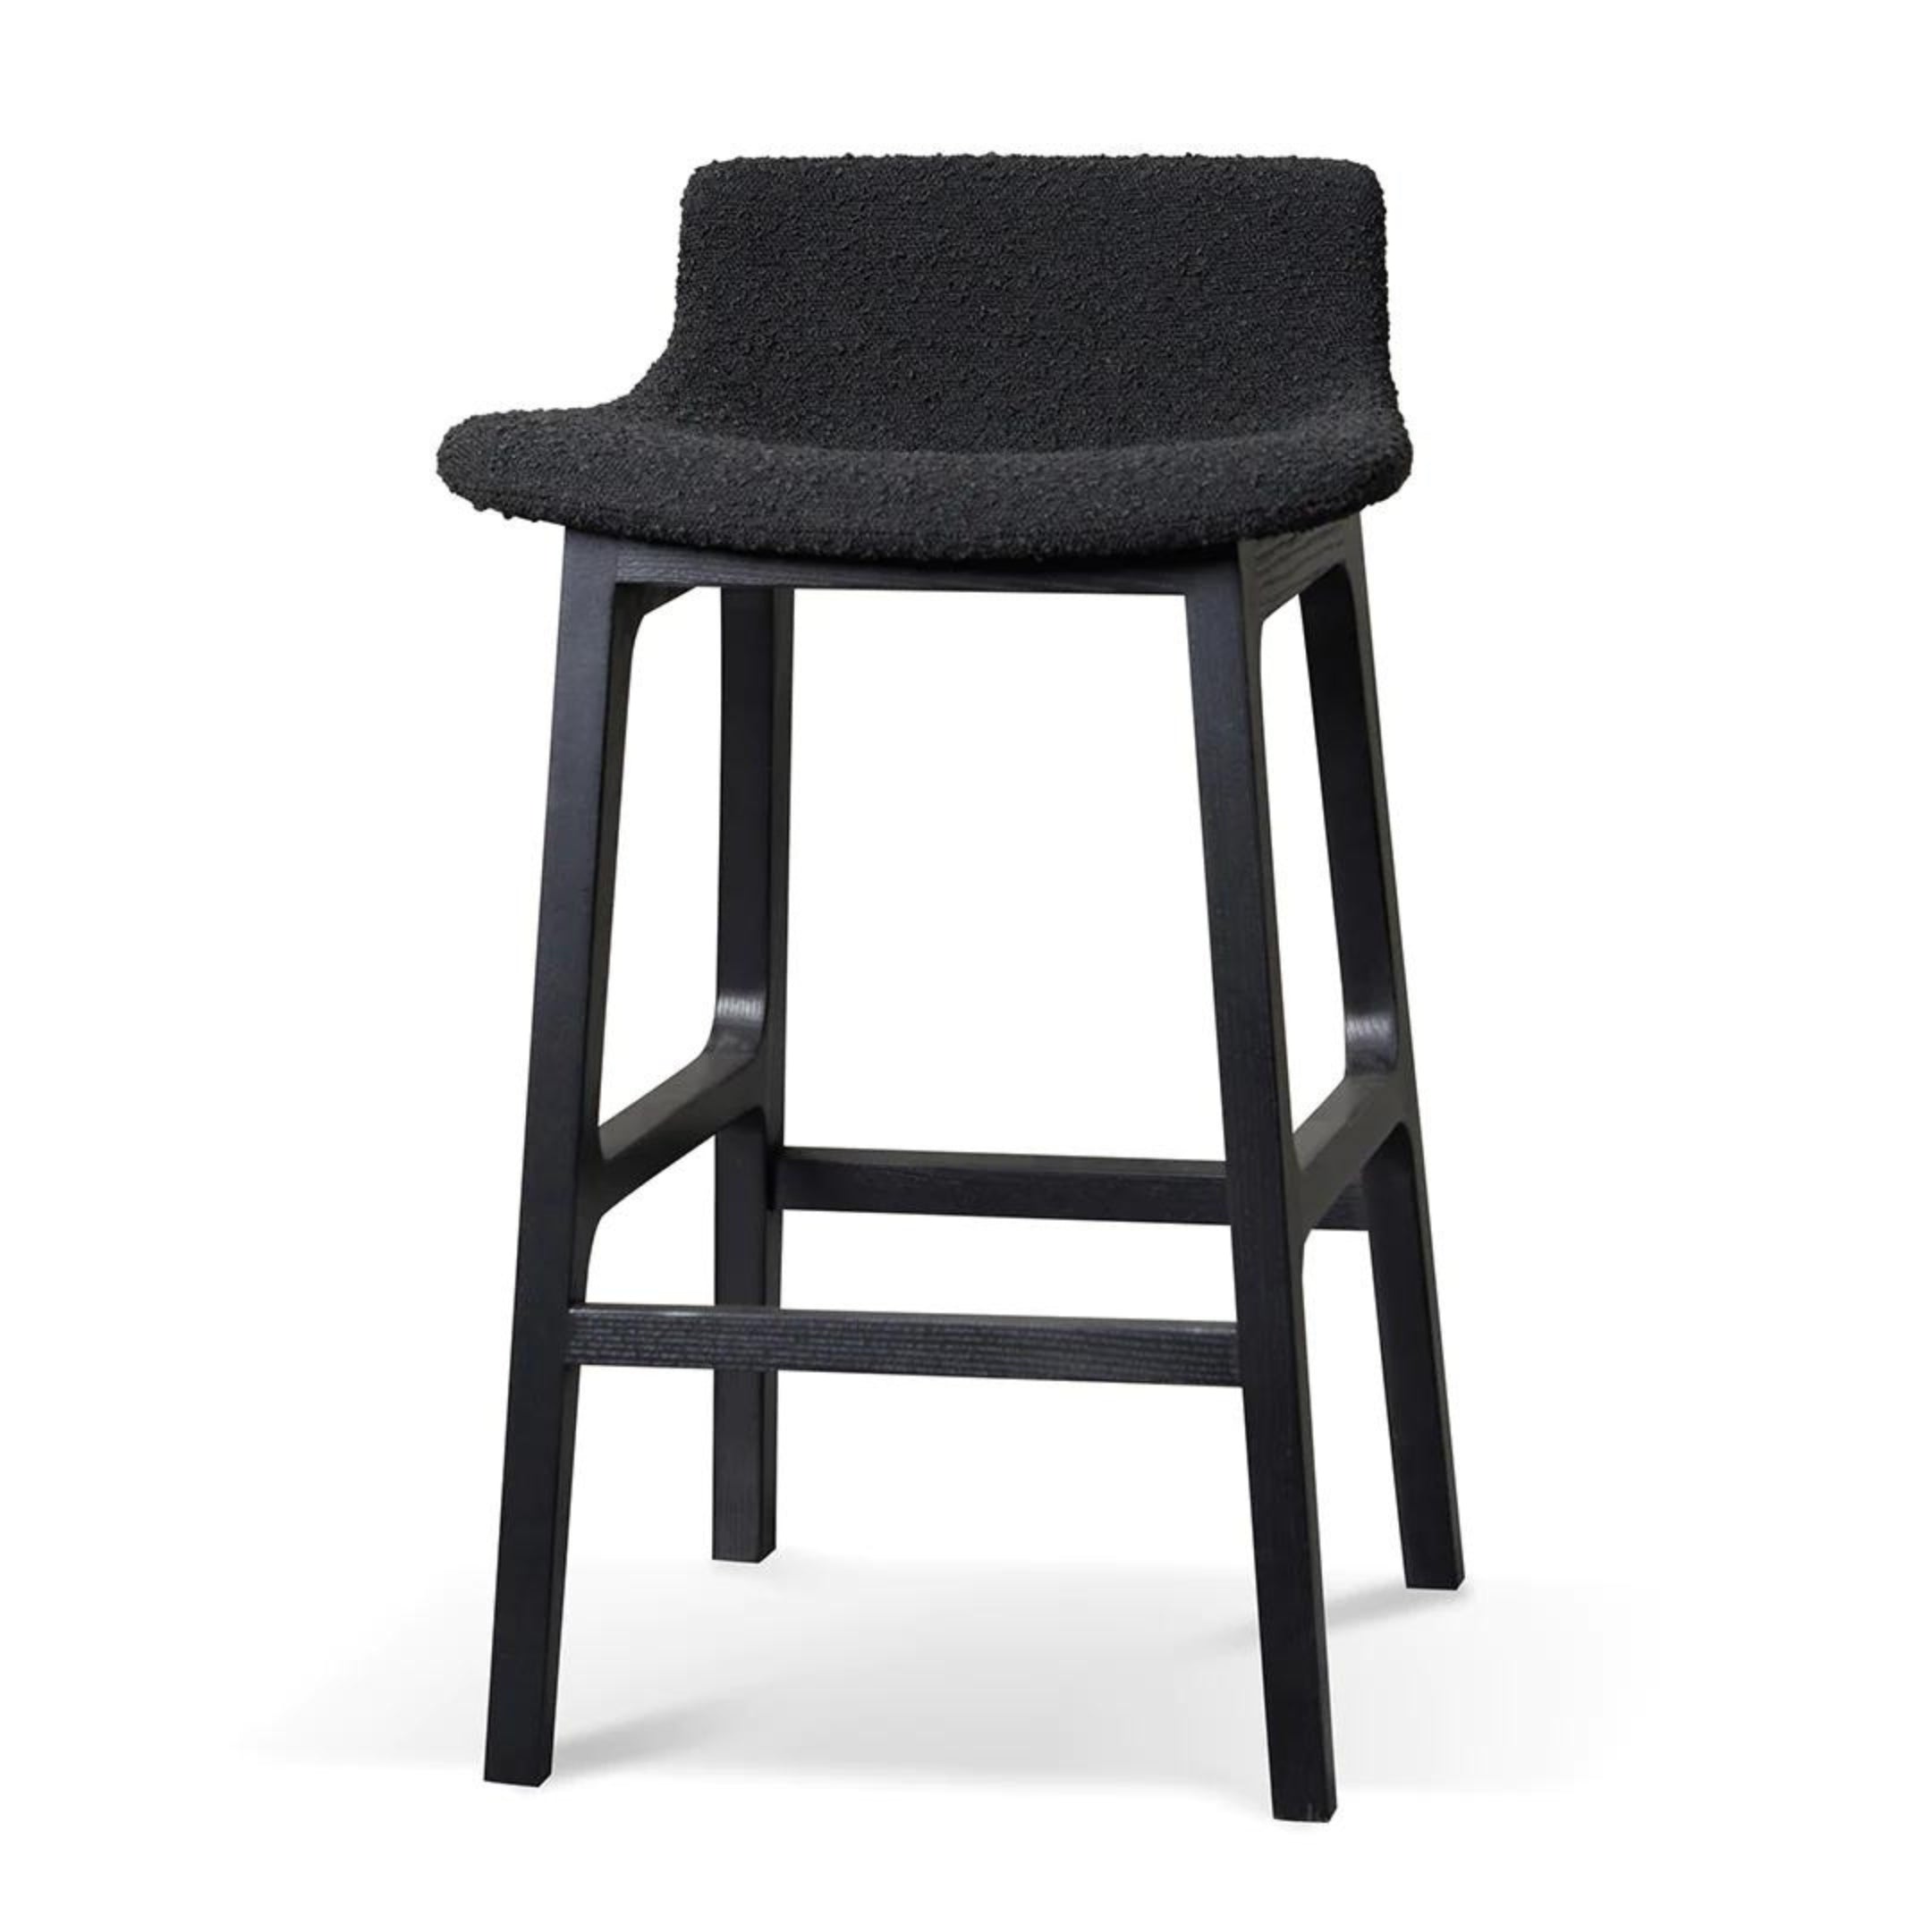 Modern black bar stool with bouclé fabric and square legs